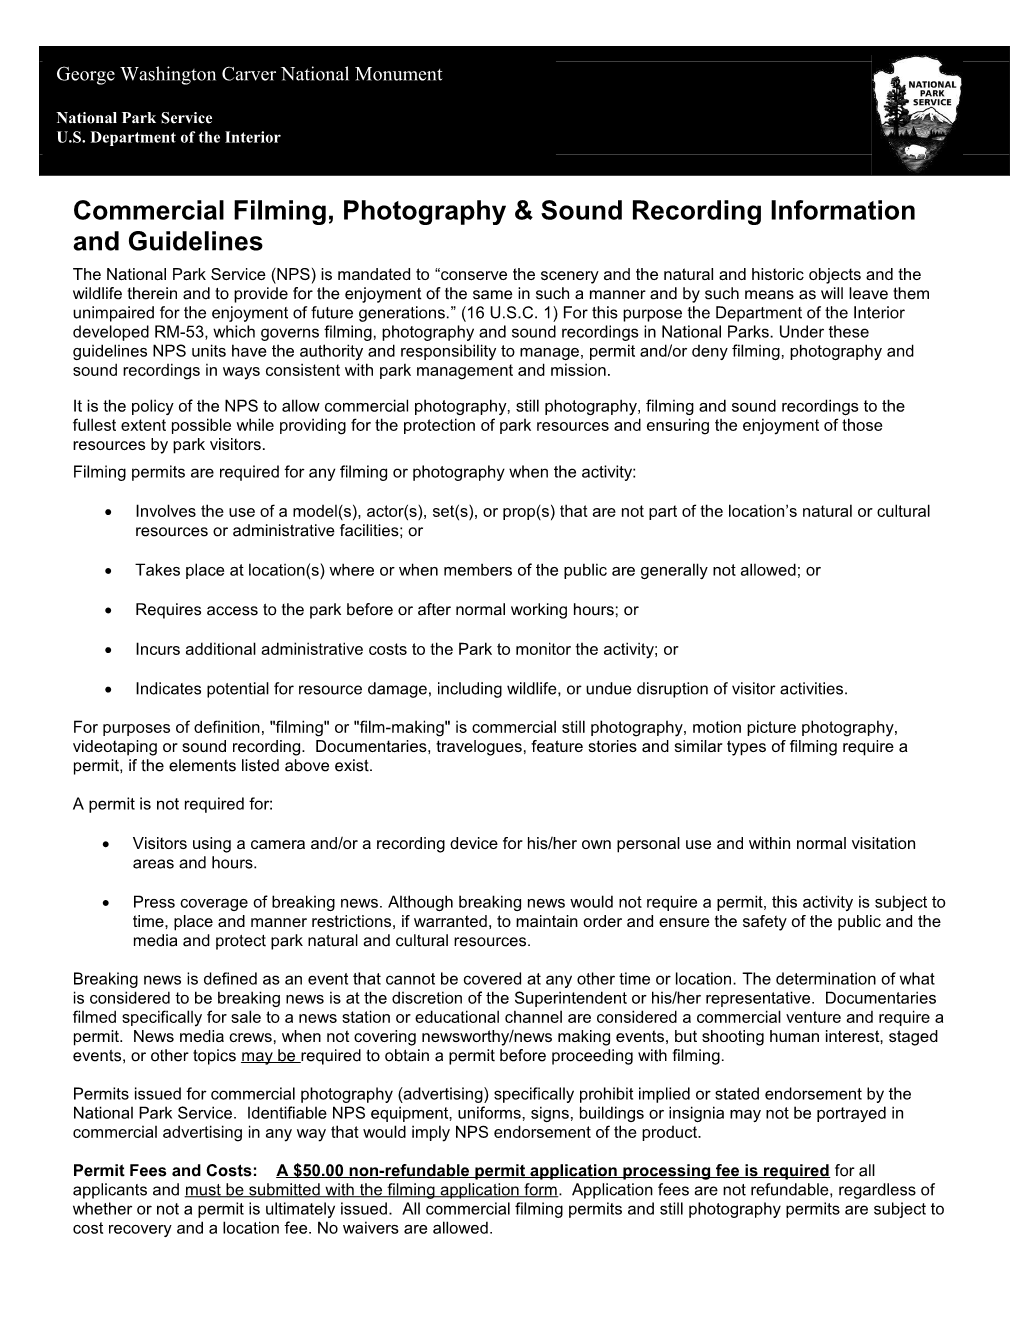 Commercial Filming, Photography & Sound Recording Information and Guidelines